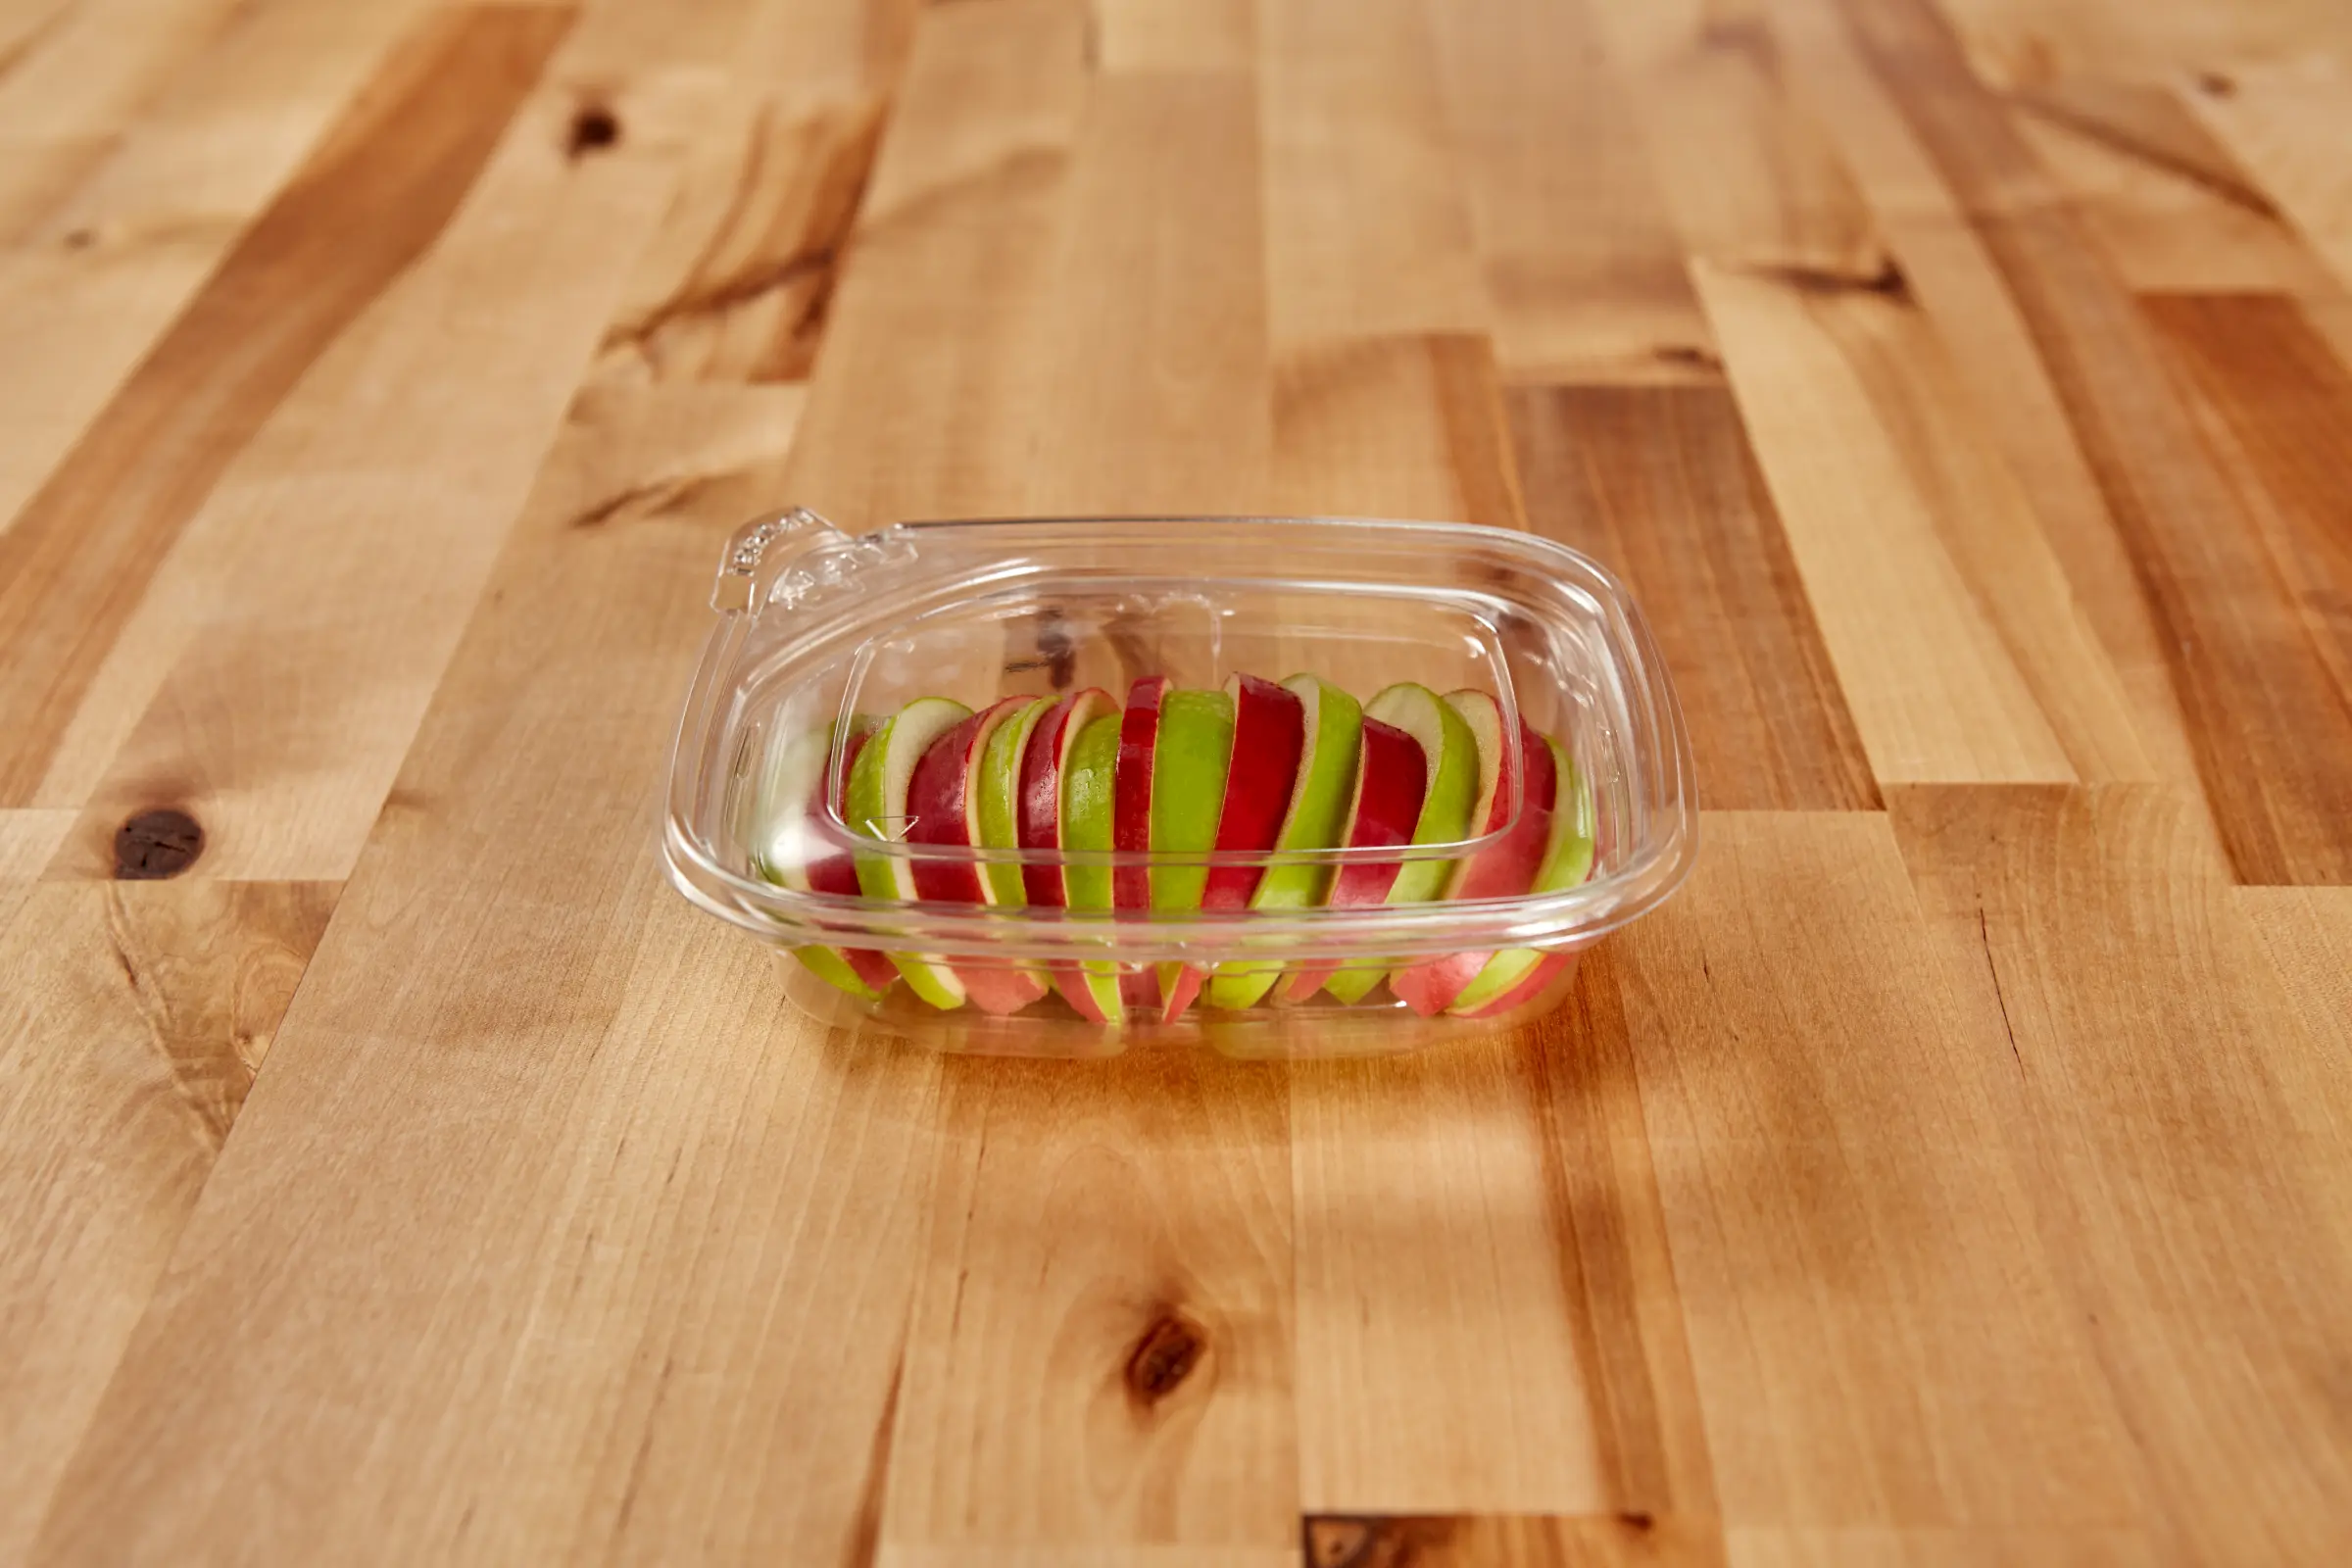 tamper-evidence Closure Takeaway Food Trays Disposable Bento Lunch  Containers Microwavable Injection Molded Soup noodle